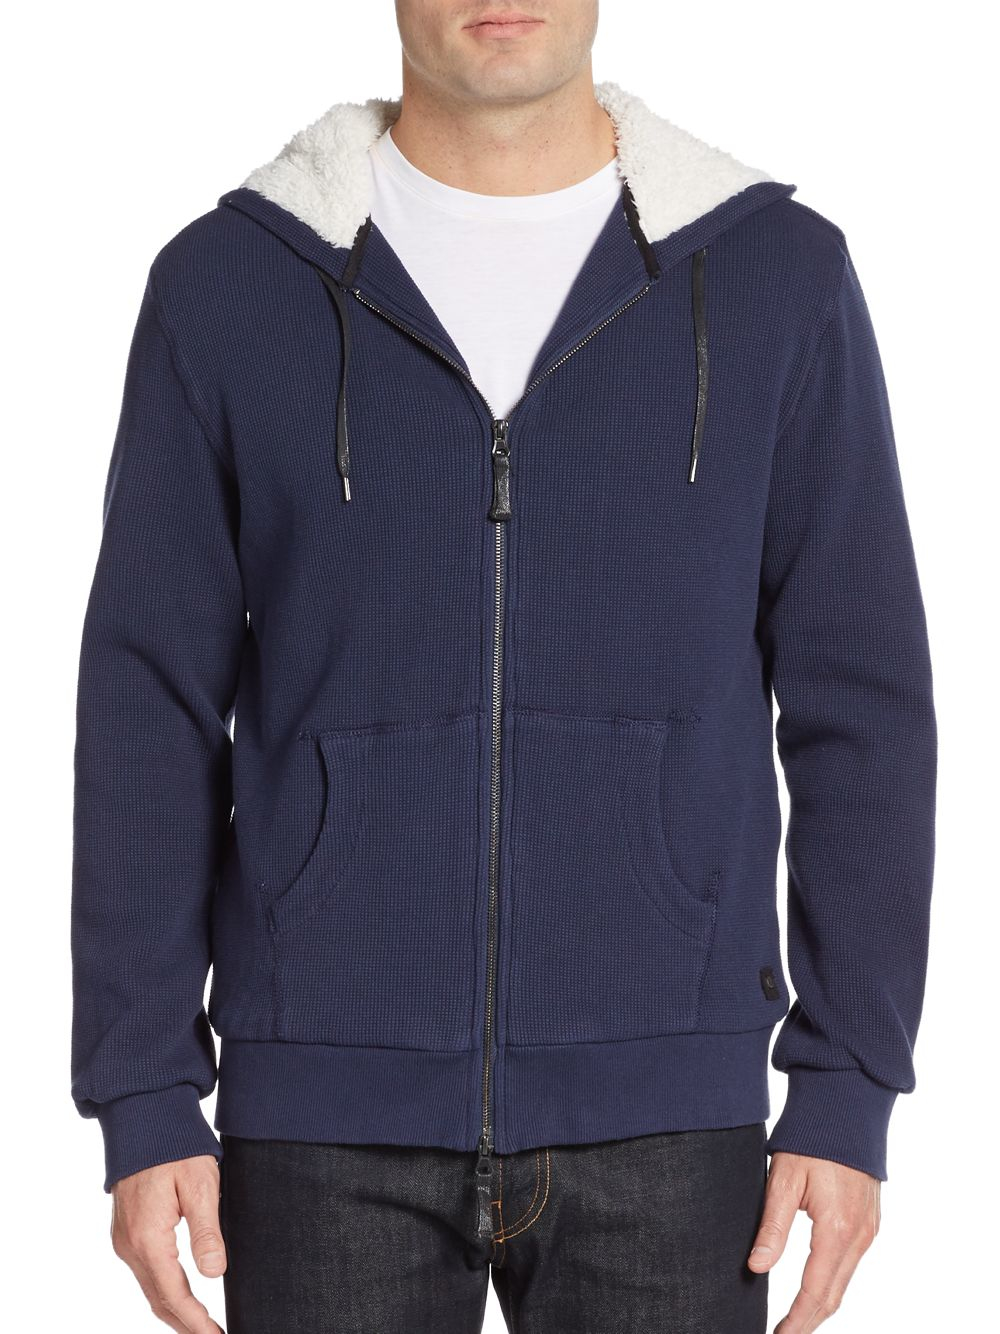 Lyst - Madison Supply Faux Fur-trimmed Hoodie in Blue for Men